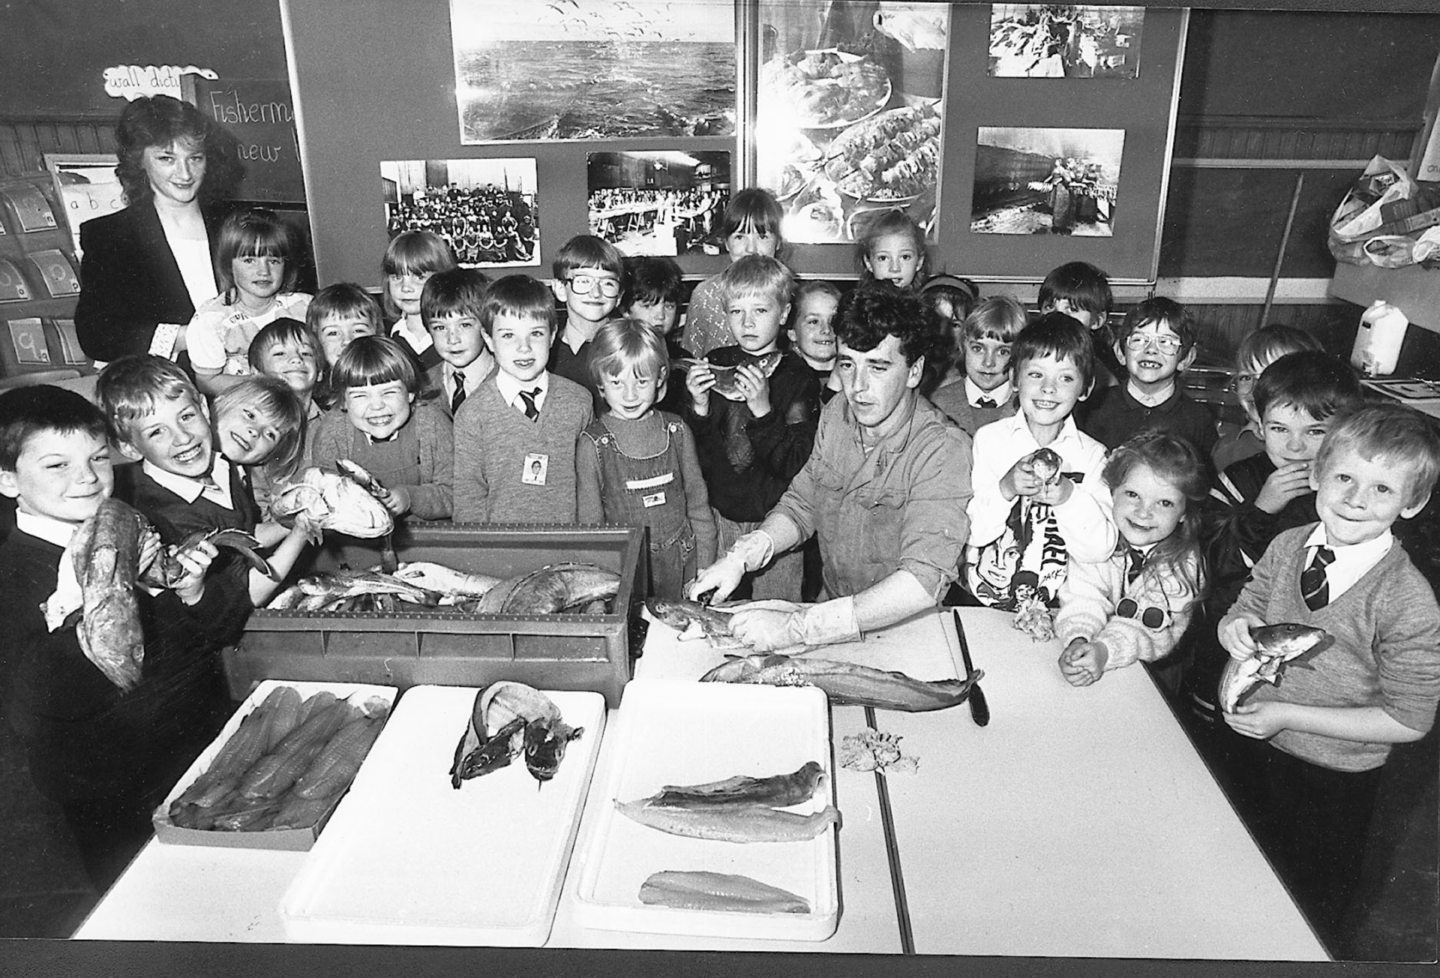 John Taylor of A. Massie and Sons gives students a talk on the fishing industry in 1990.